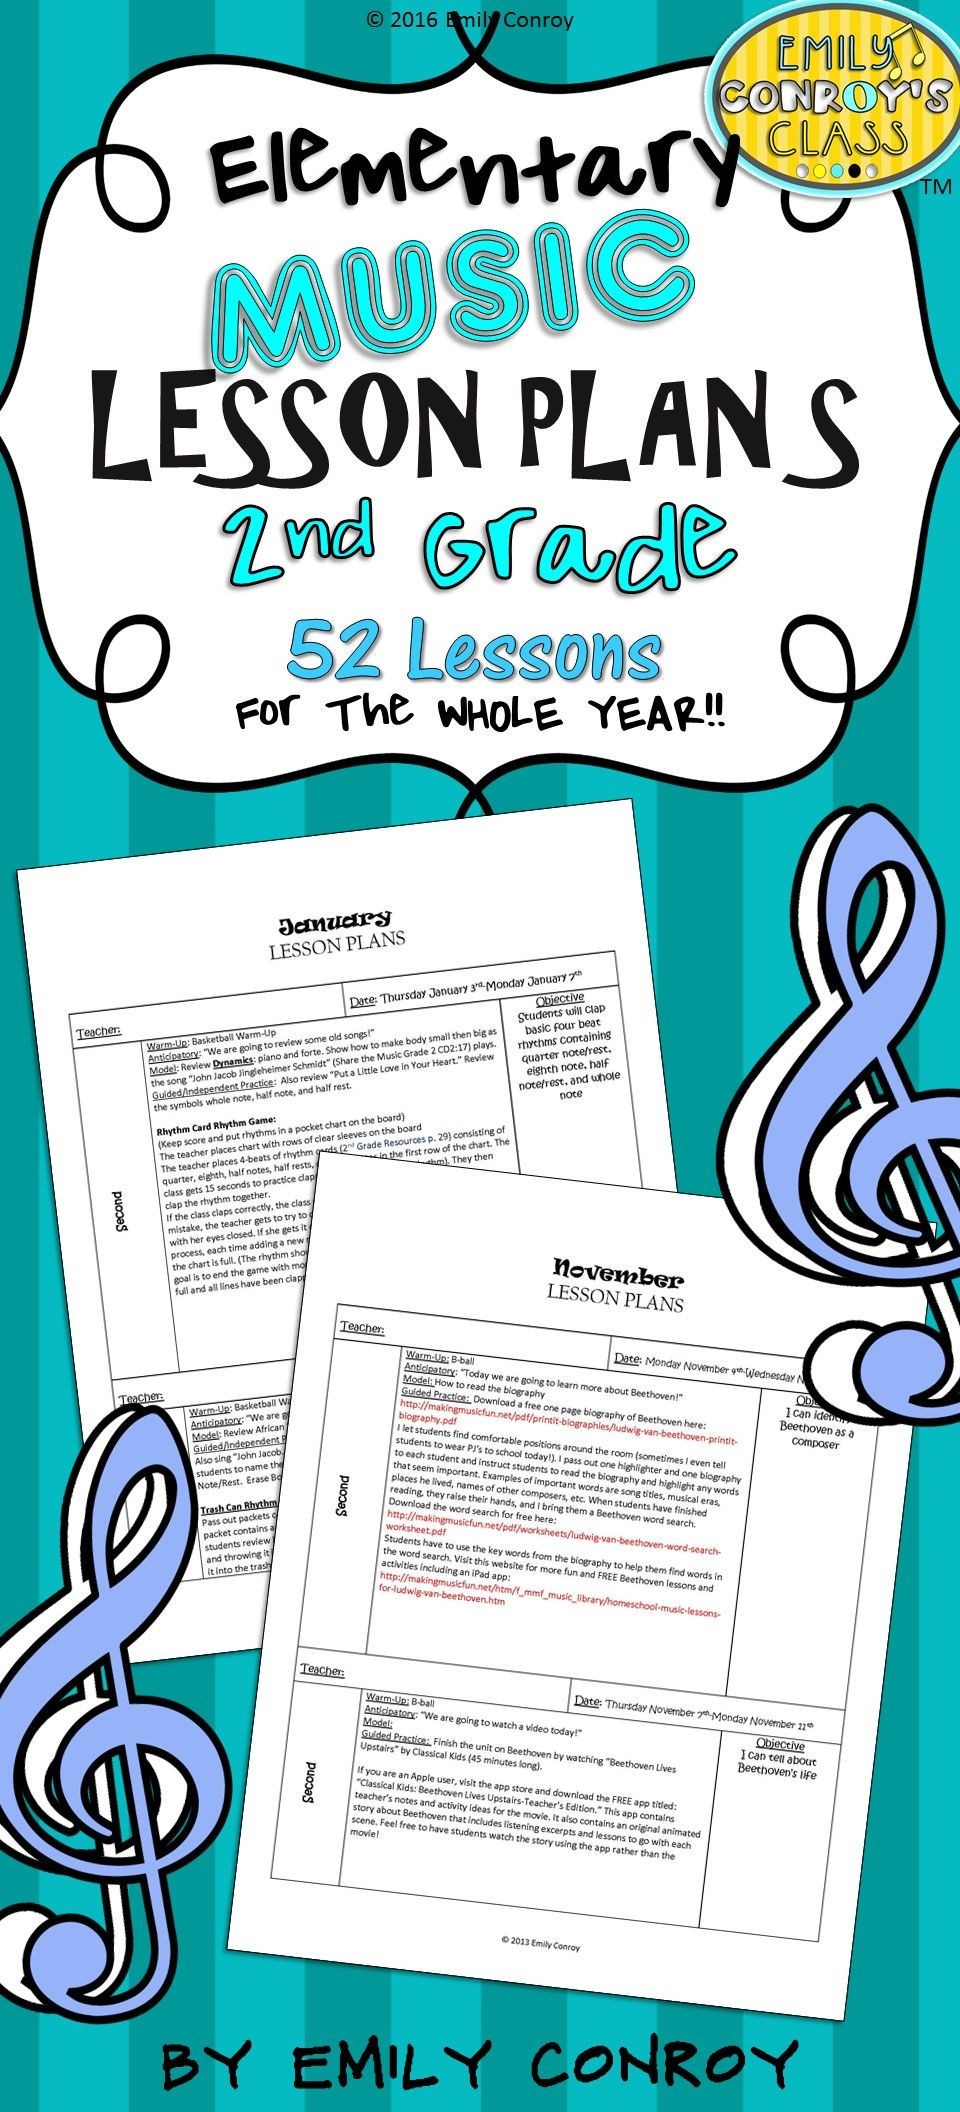 Elementary Music Lesson Plans Elementary Music Lesson Plans Second Grade